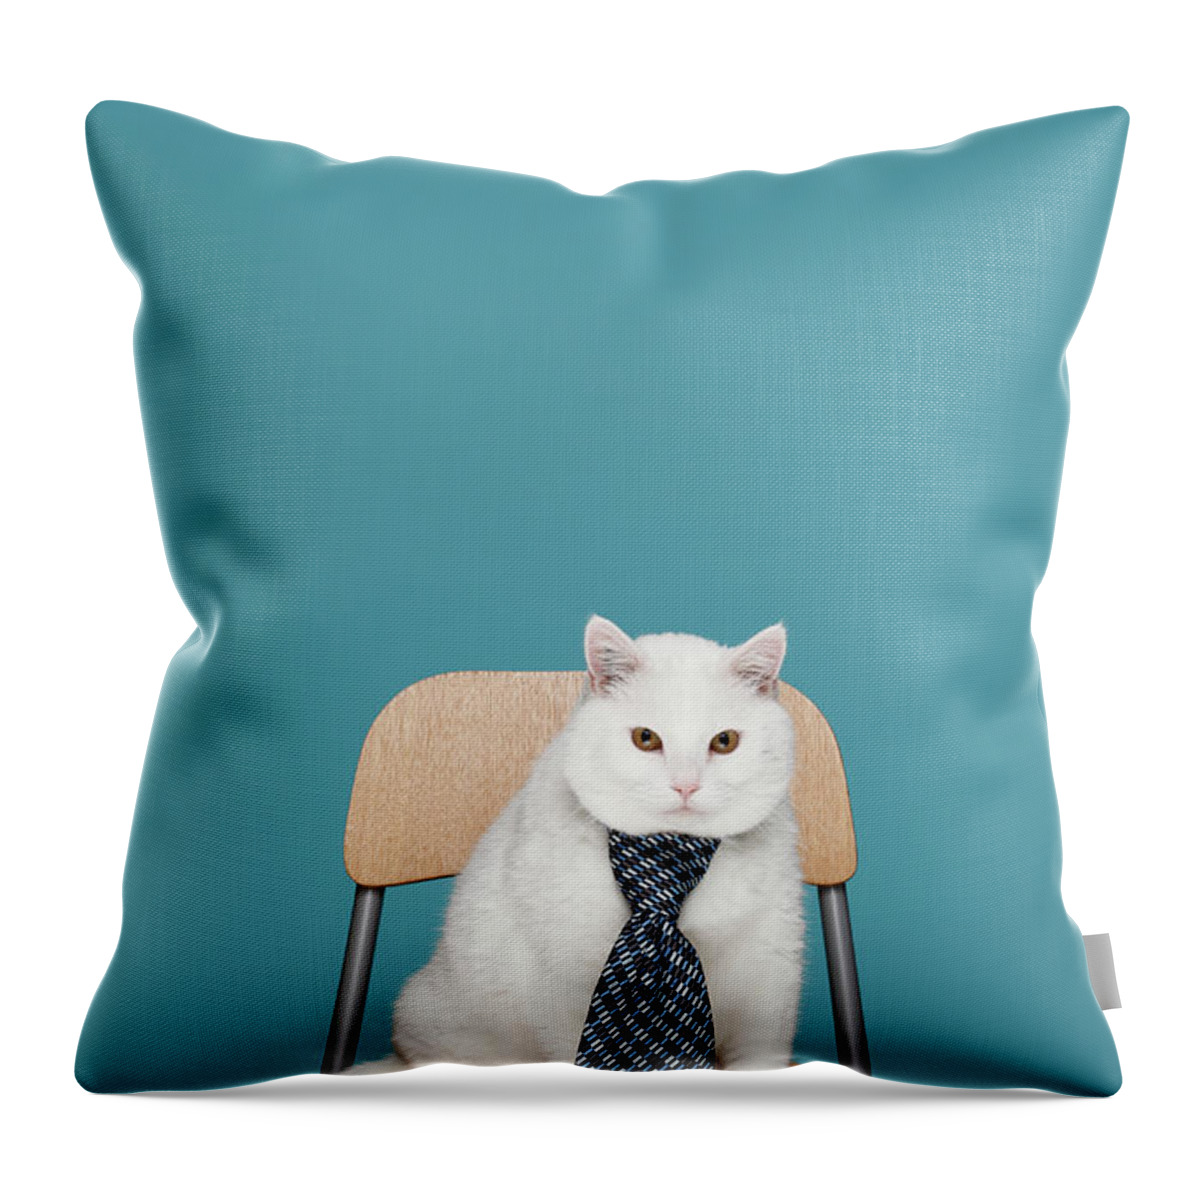 Pets Throw Pillow featuring the photograph White Cat In Tie by Steven Coutts Photography